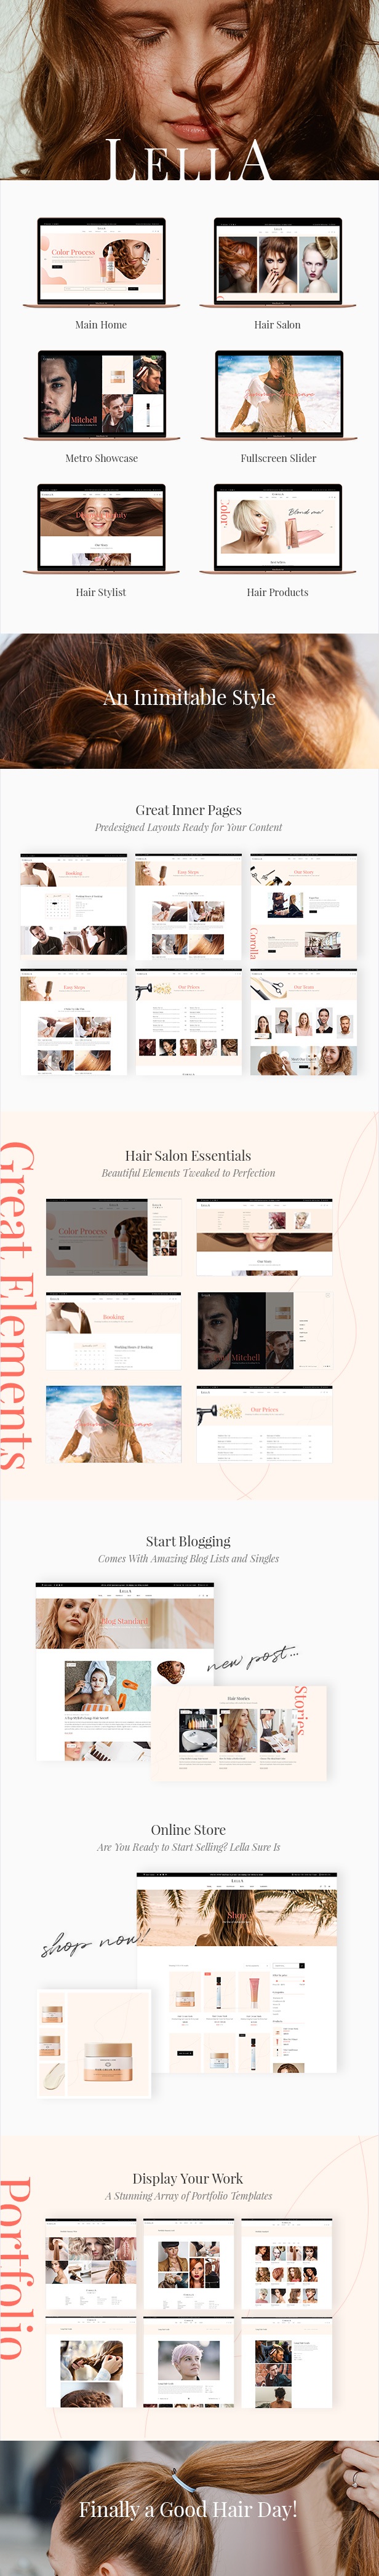 Lella - Hairdresser and Beauty Salon Theme by Elated-Themes | ThemeForest